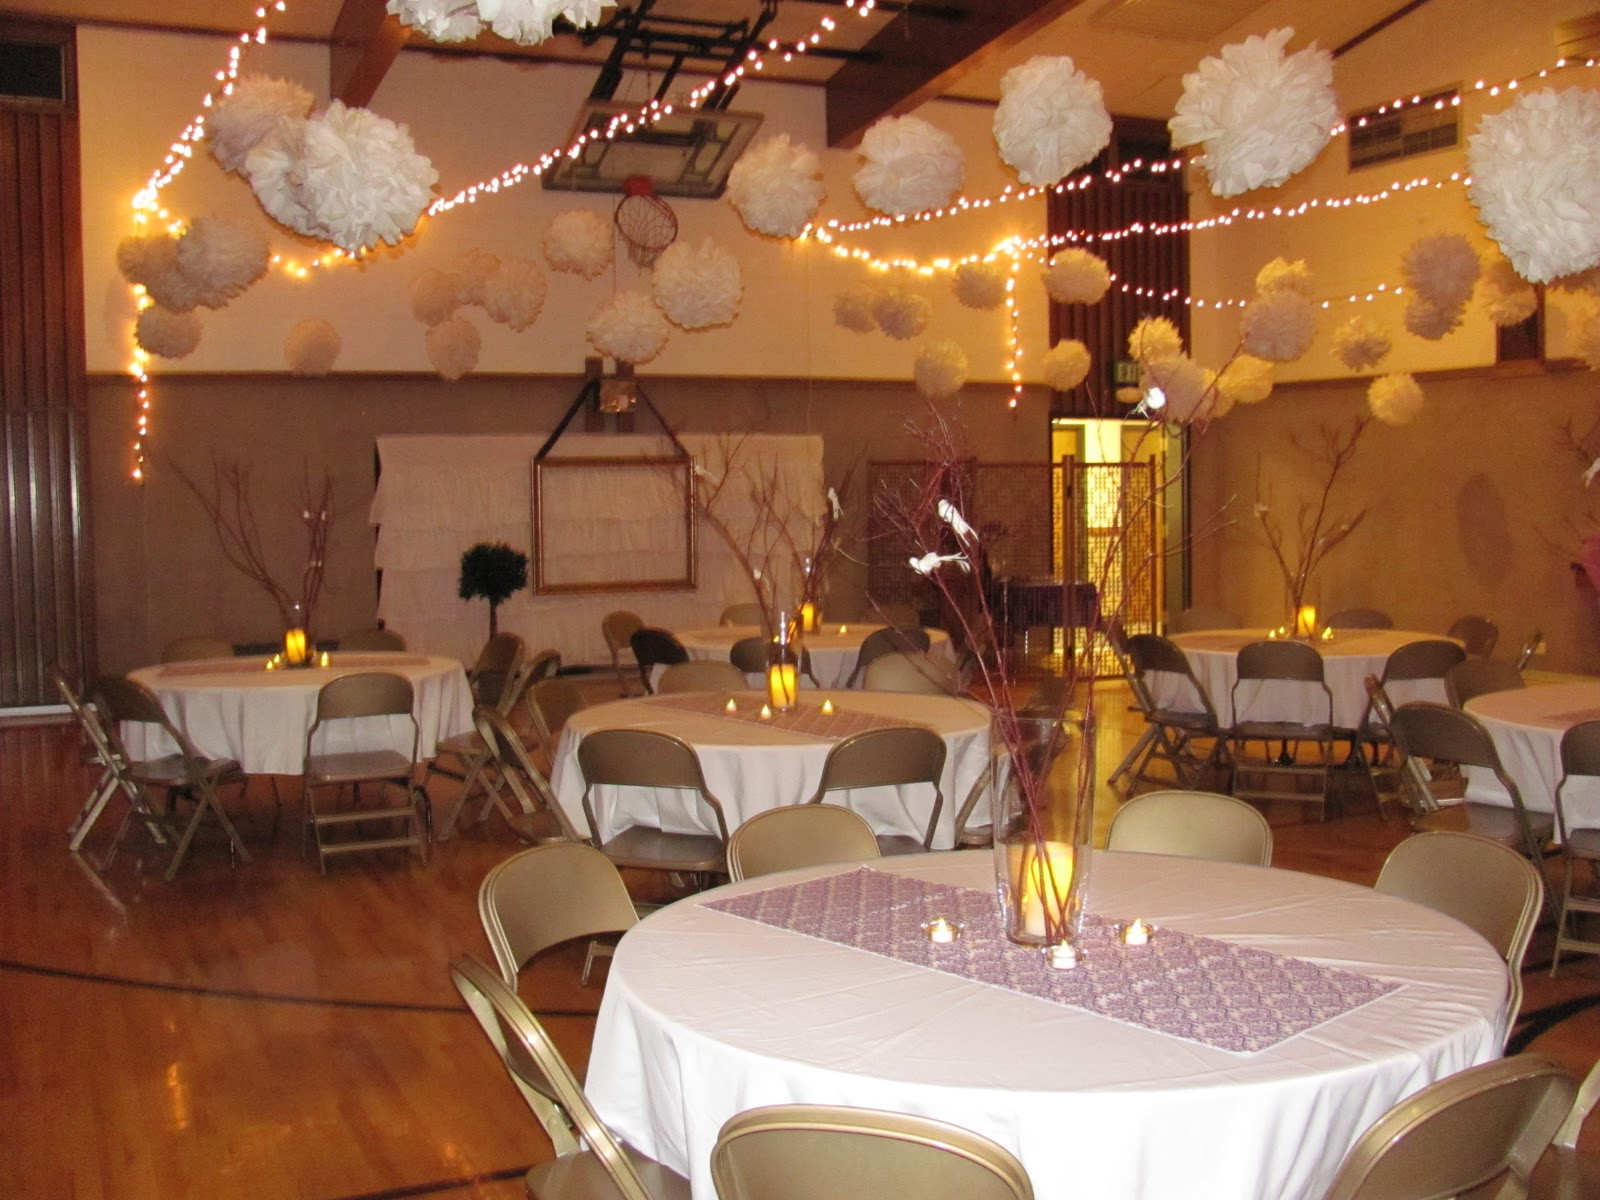 How To Decorate For A Wedding Reception
 Header Wedding Open House Decorating